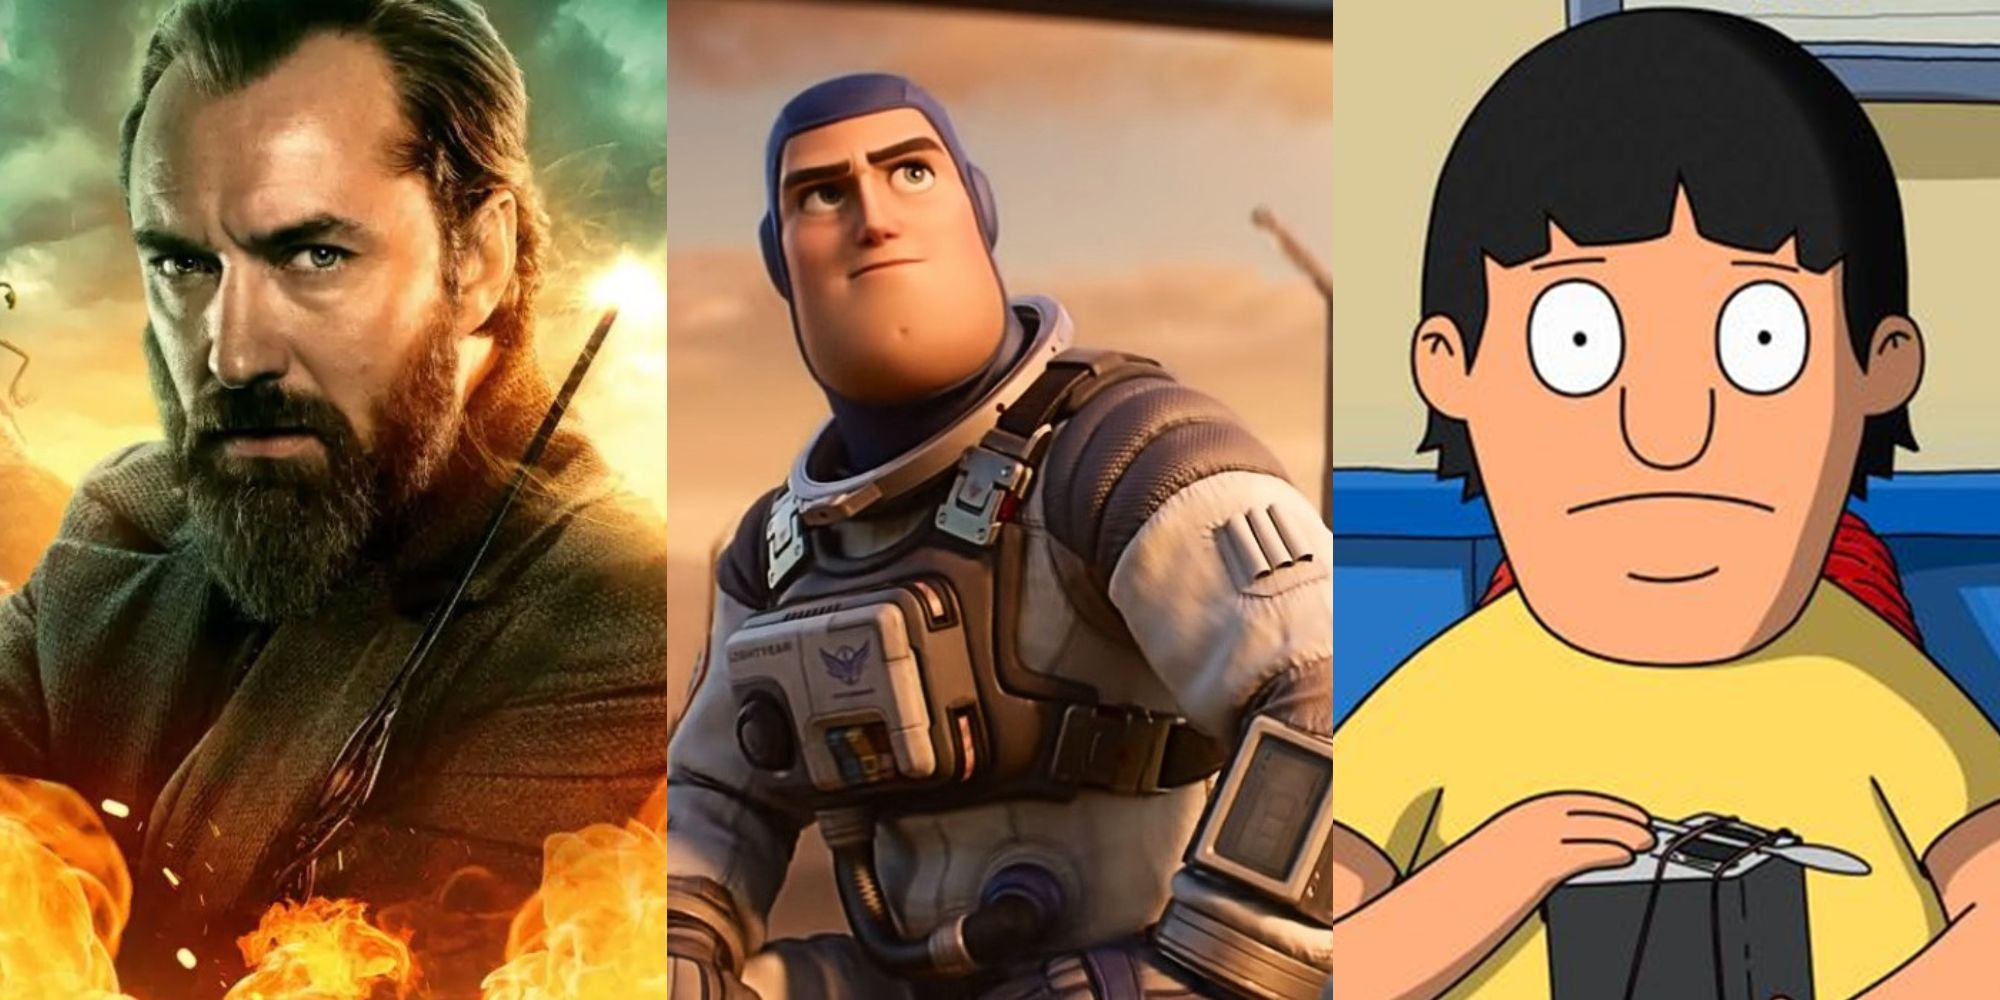 Fantastic Beats The Crimes of Grindelwald, Lightyear, and The Bob's Burgers Movie are some of the year's biggest box office flops